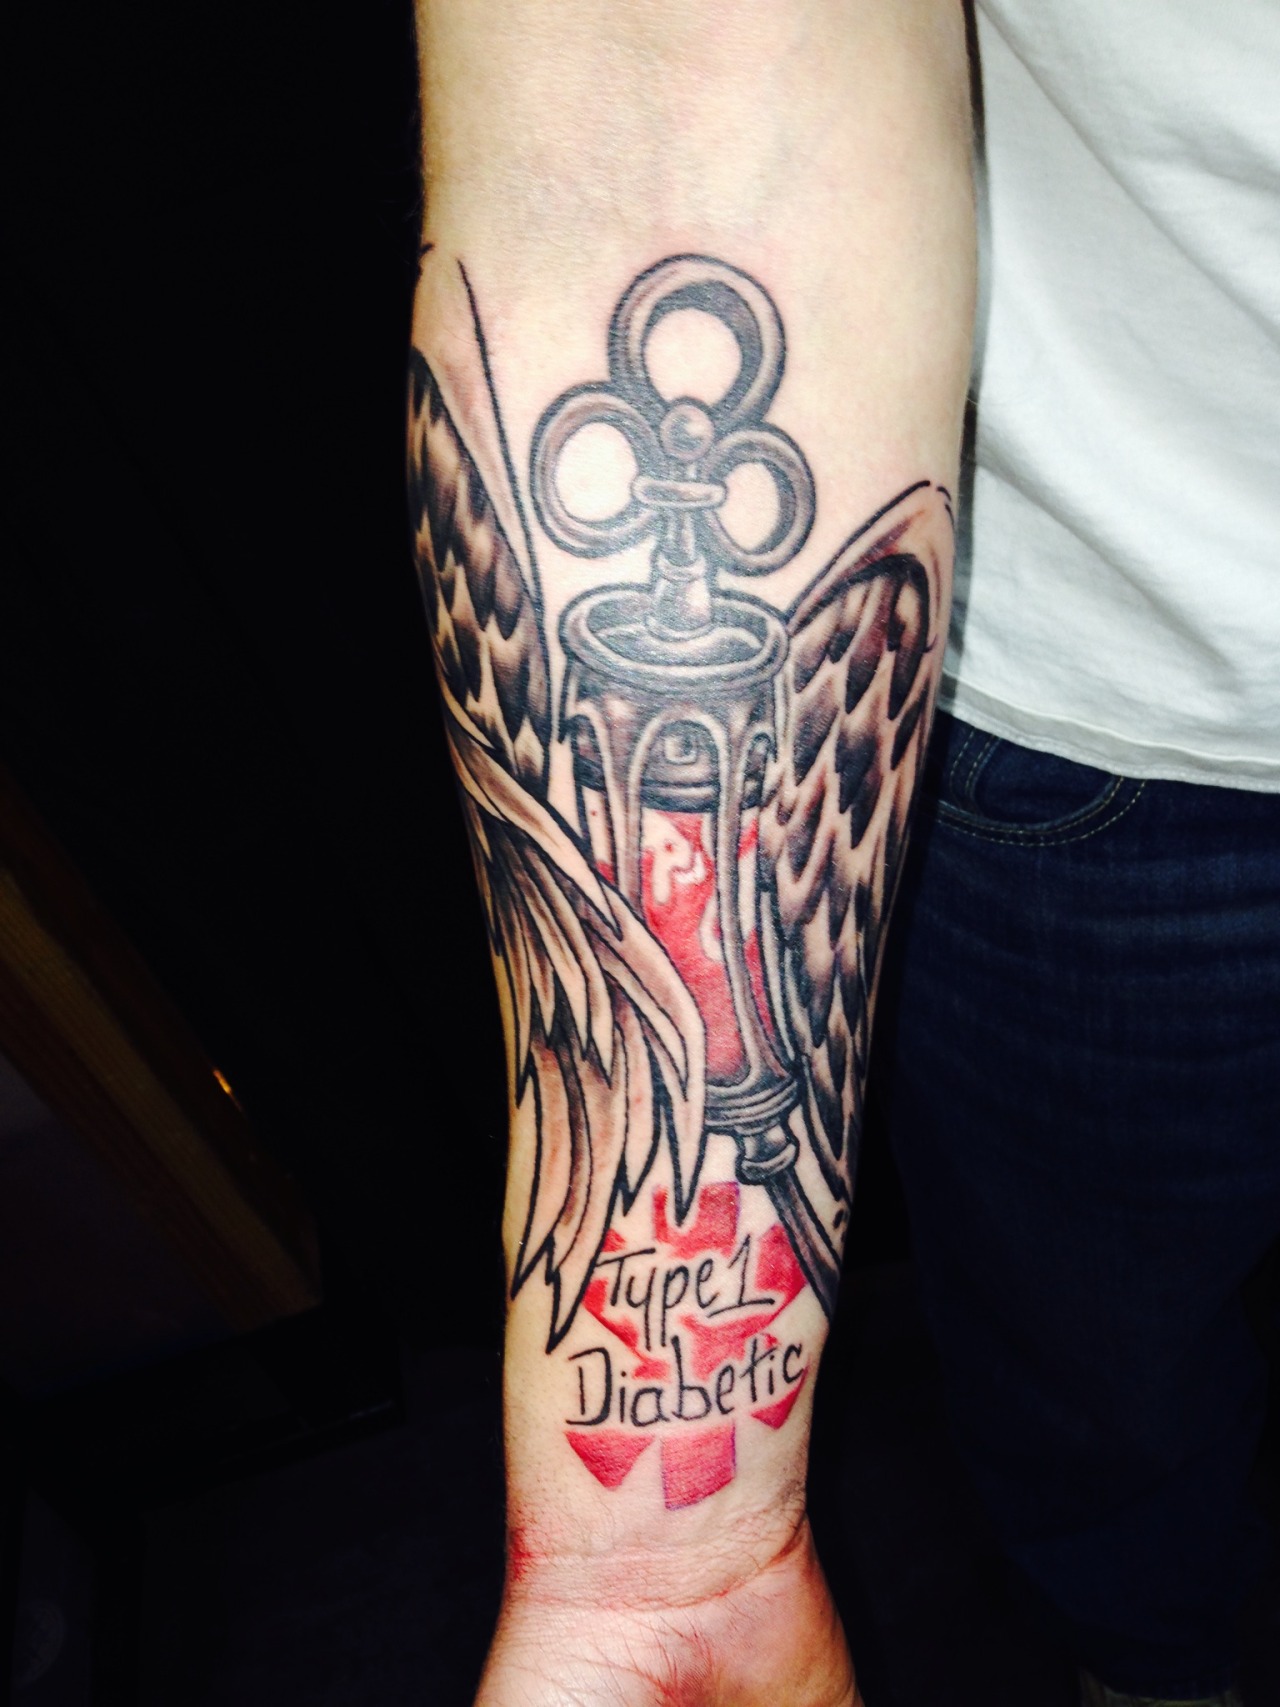 Bryan Barberi’s diabetic ink. I love this one.
Bryan was diagnosed at age 10, now 23. His father is also a type 1 diabetic. Bryan is an auto-tech at GM and loves building and racing. He is also into the outdoors, climbing, firearms, and hunting....